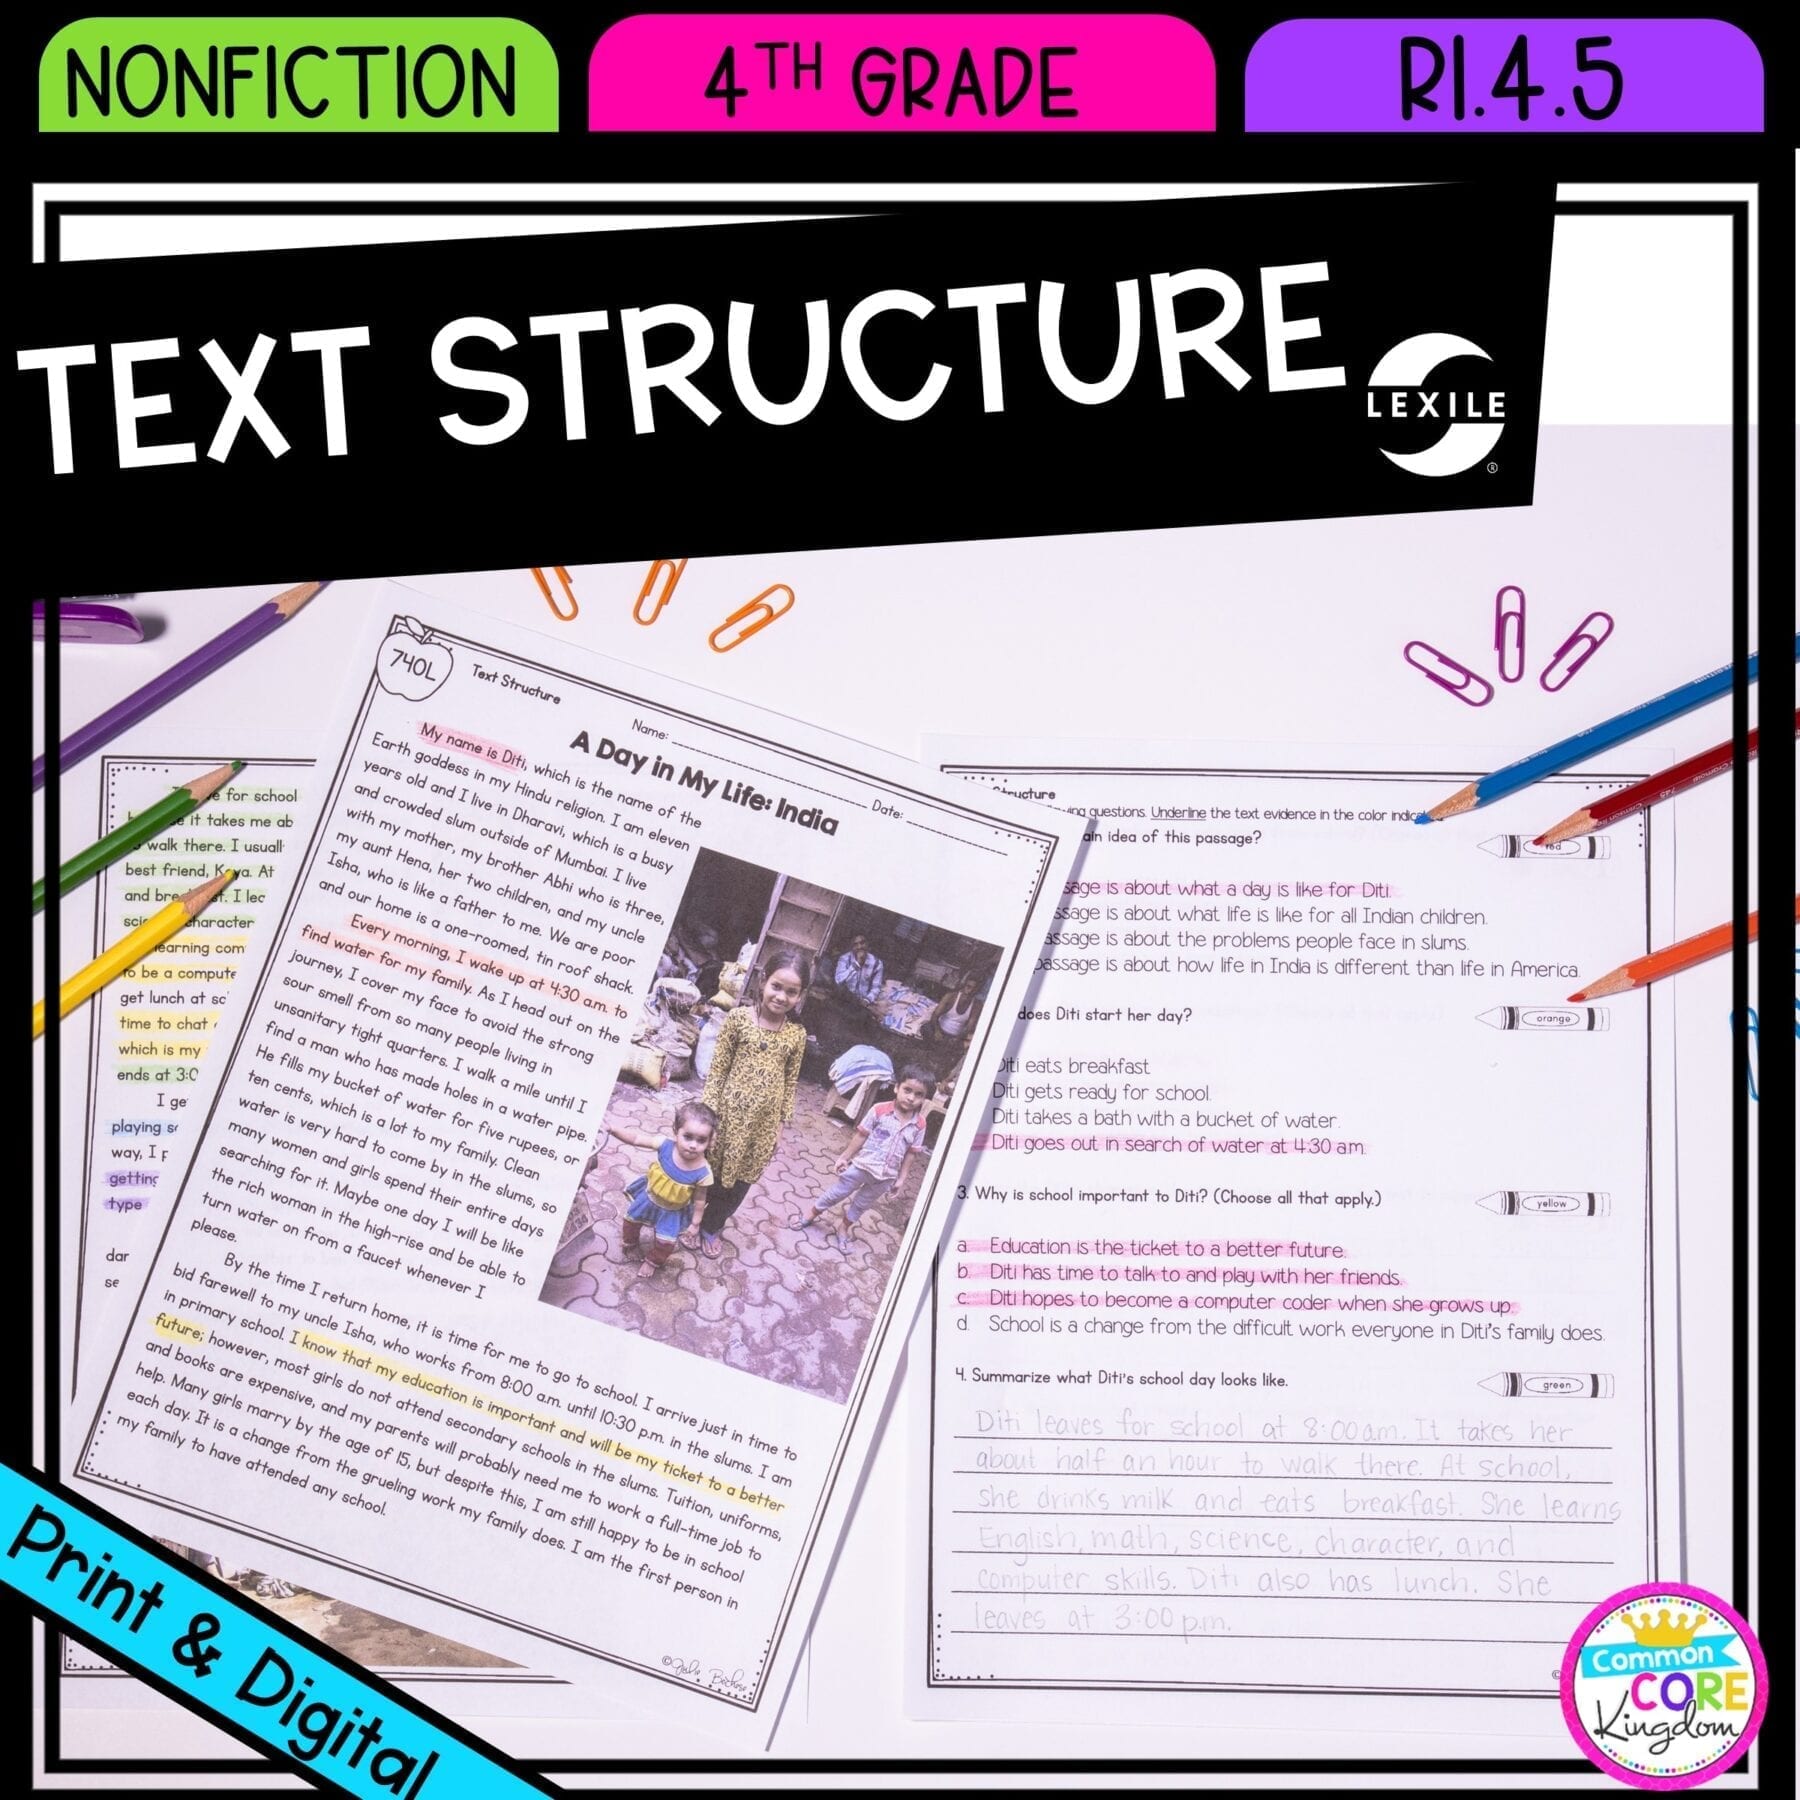 Text Structure in Nonfiction for 4th grade cover showing printable and digital worksheets